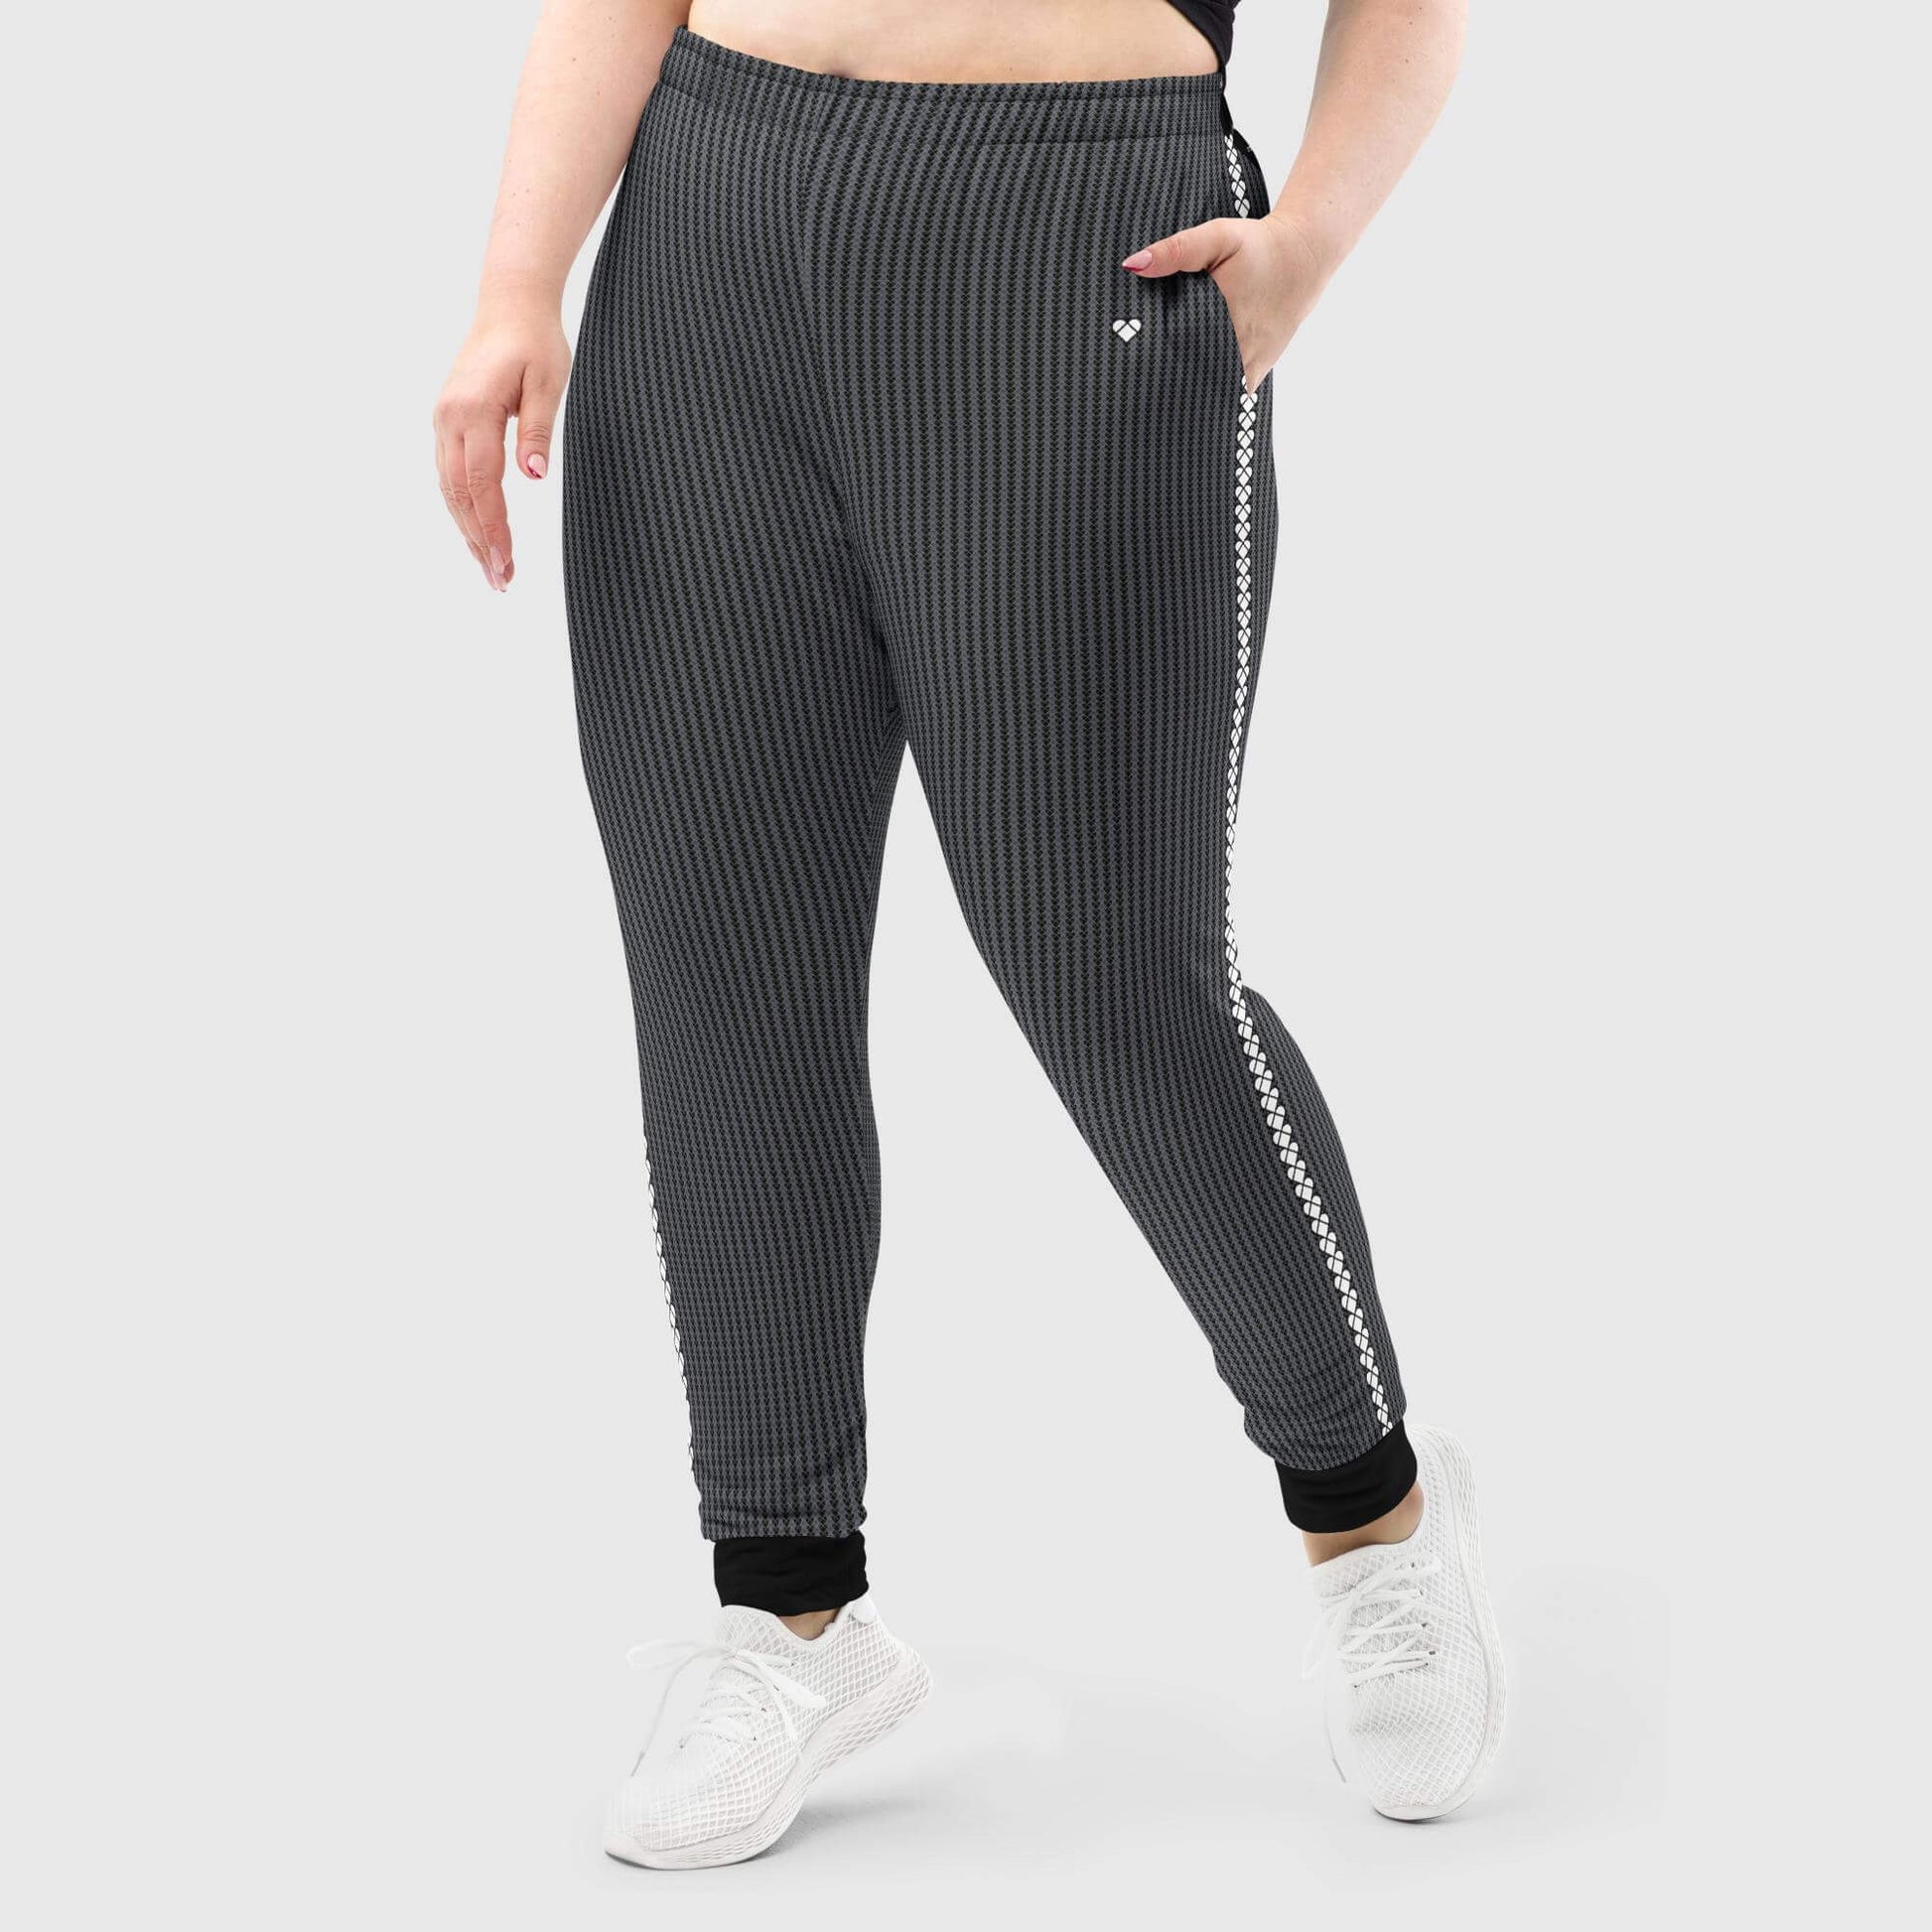 Dualshade Lovogram Black Joggers for Women, eco-friendly and versatile, perfect for lounging or running errands, with practical pockets and a stylish design, girl model wearing